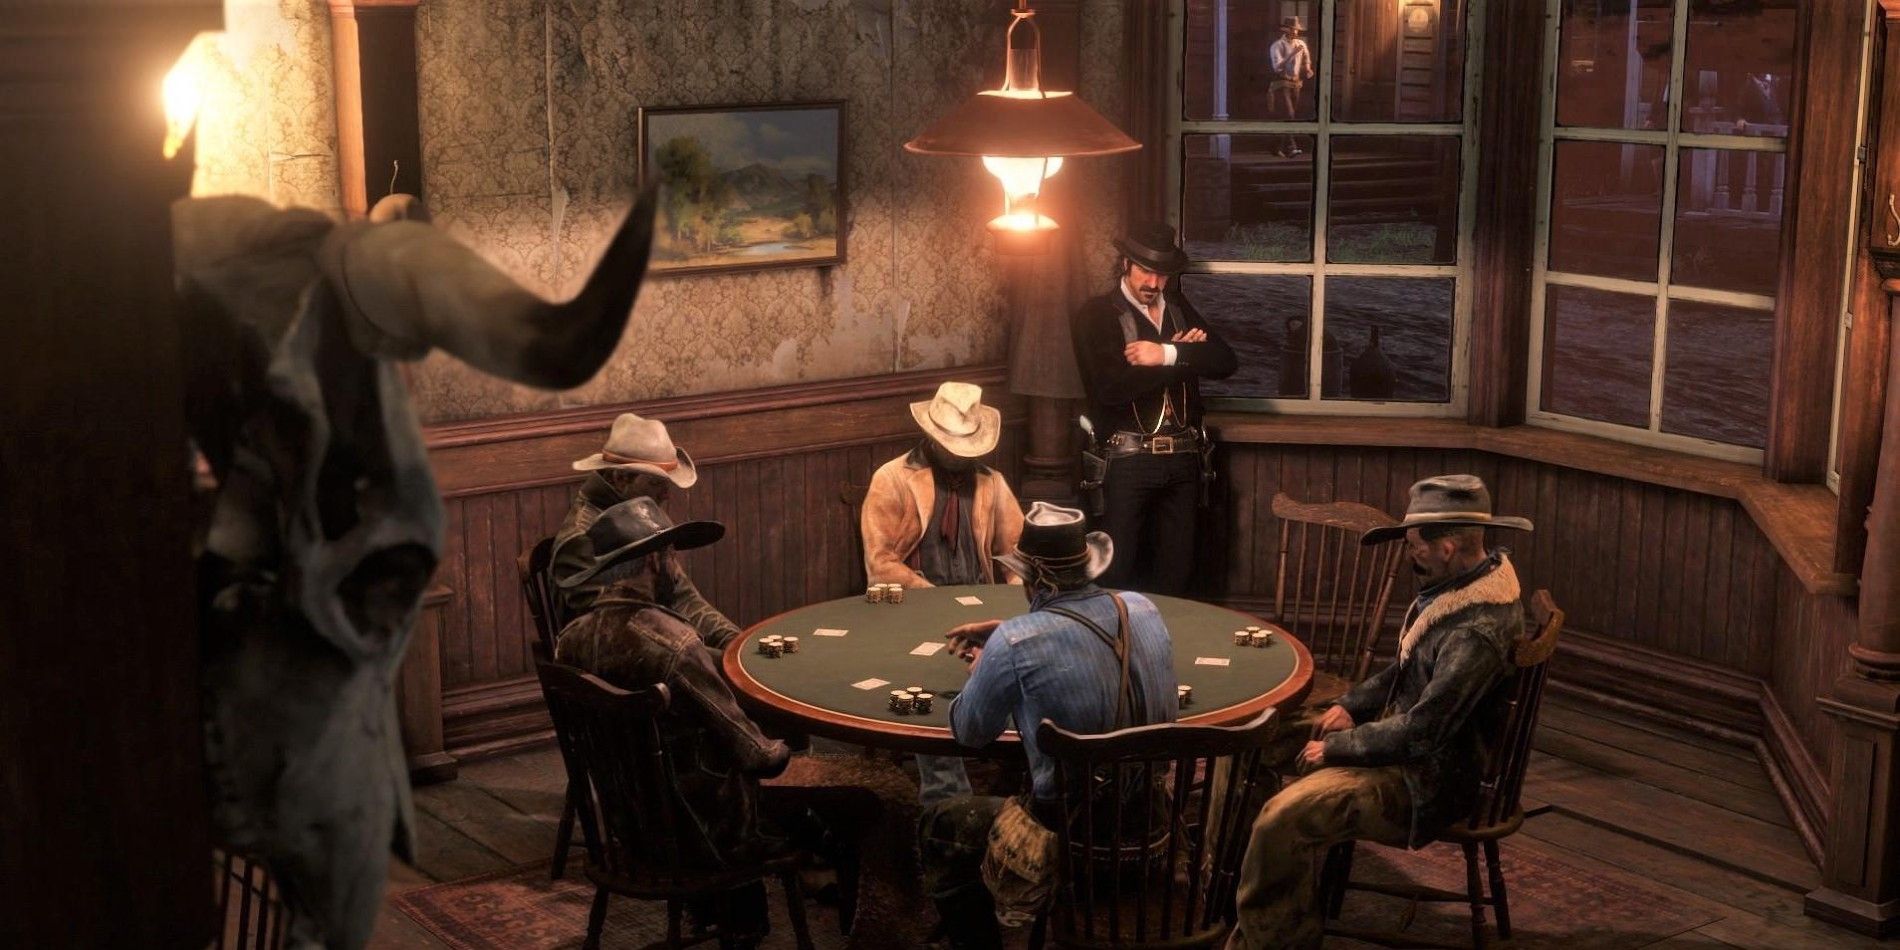 Making smart bets in RDR 2 poker keeps Arthur in the game and grows his wallet.